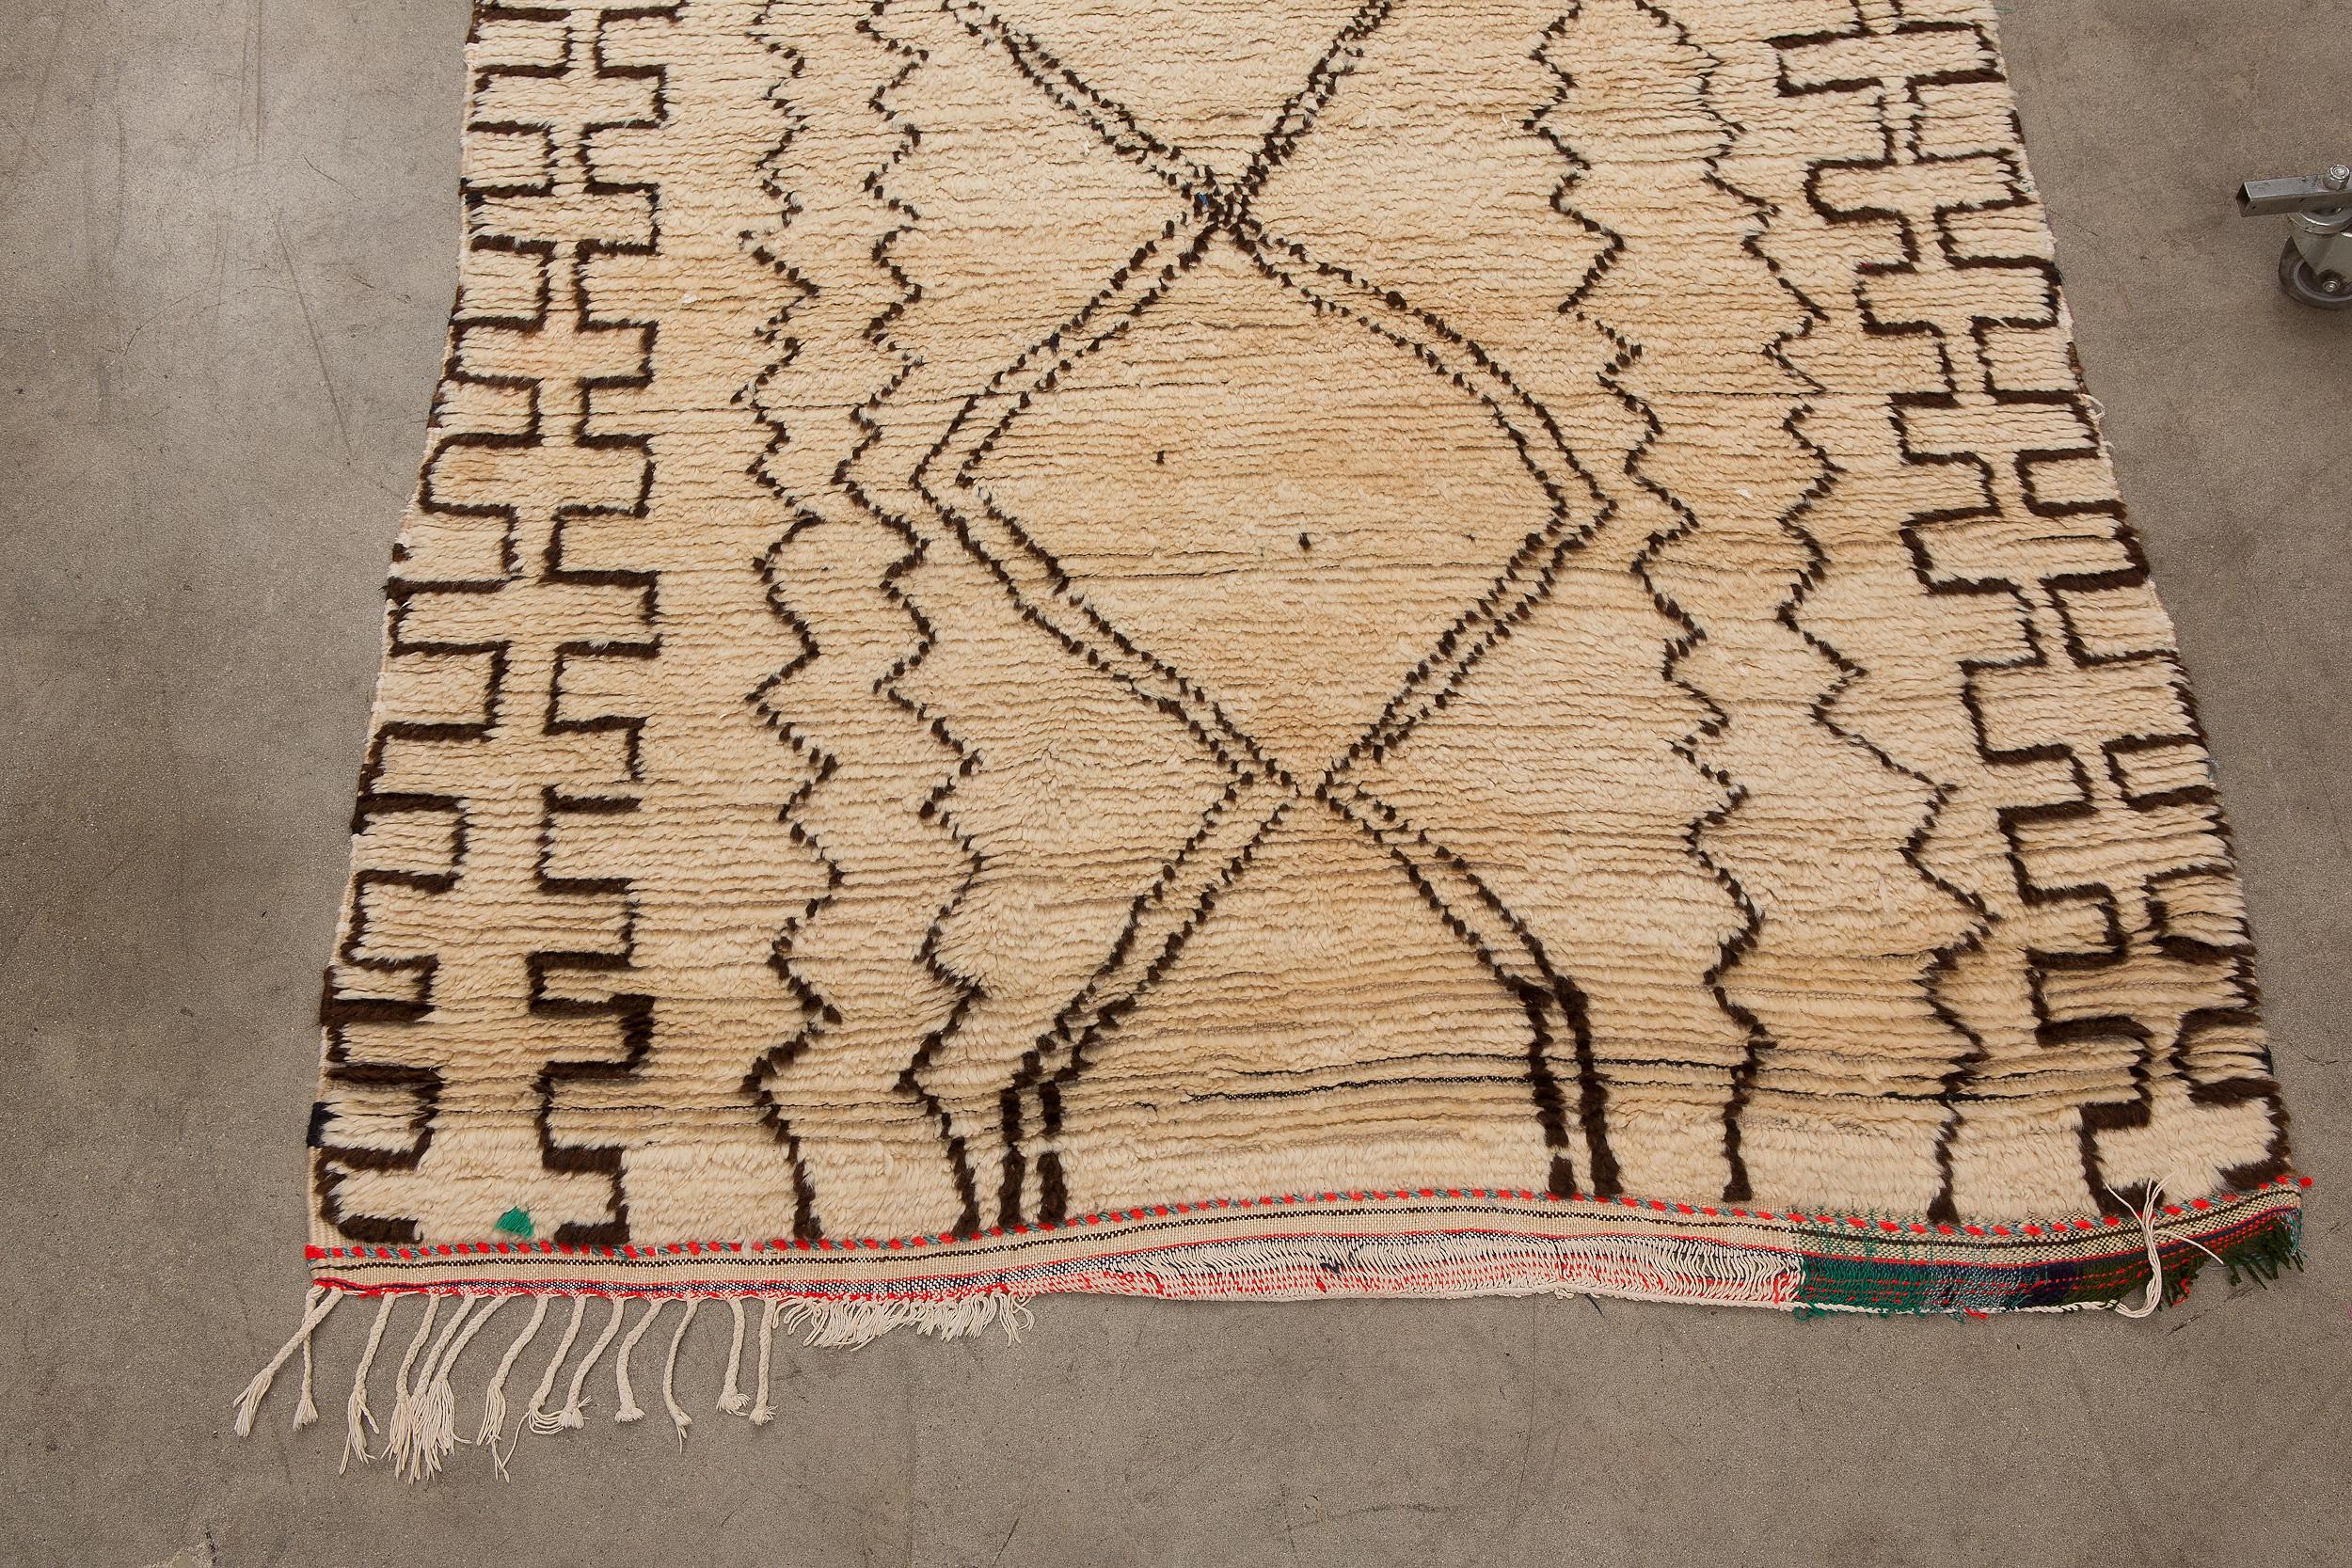 Azilal rugs are known for their artistic, abstract and avant-garde style of weaving. Being single-knotted allows for finer work and design. Often made from silky un-dyed sheep’s wool with a neutral ivory base, utilizing brown or black wool to create